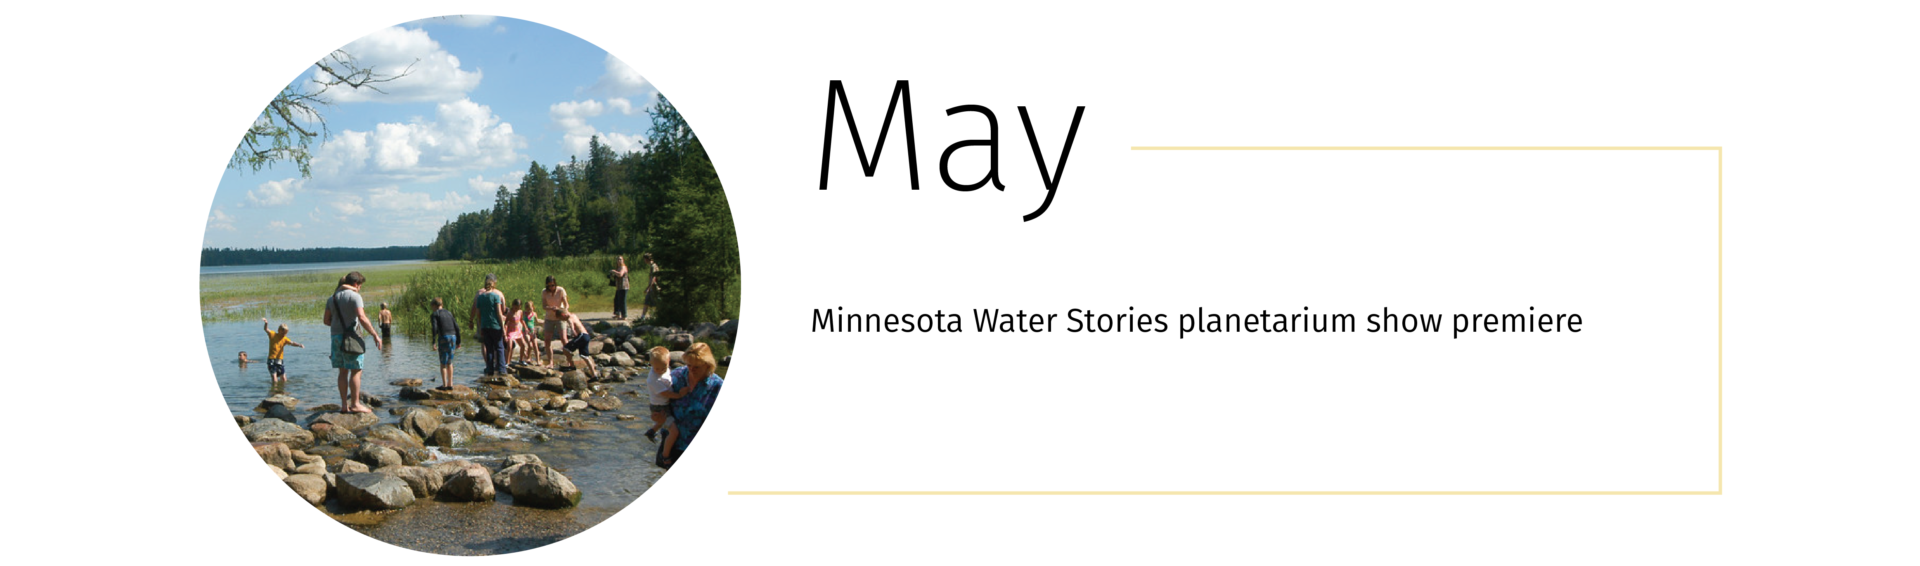 People near the water at Itasca State park and the text, " Minnesota Water Stories planetarium show premiere"